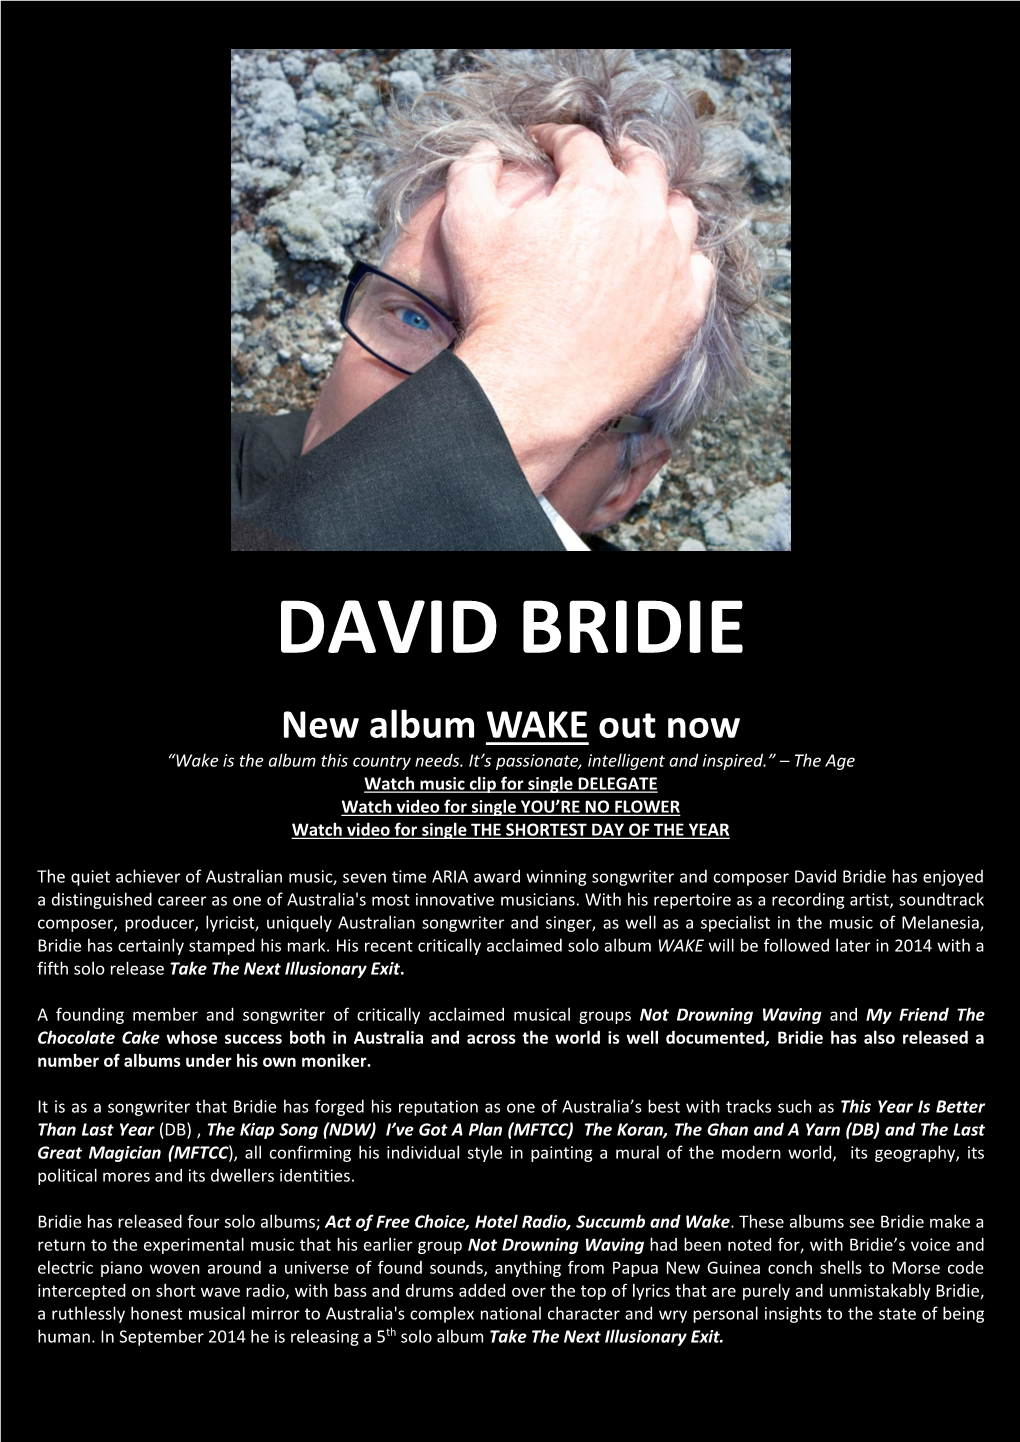 DAVID BRIDIE New Album WAKE out Now “Wake Is the Album This Country Needs